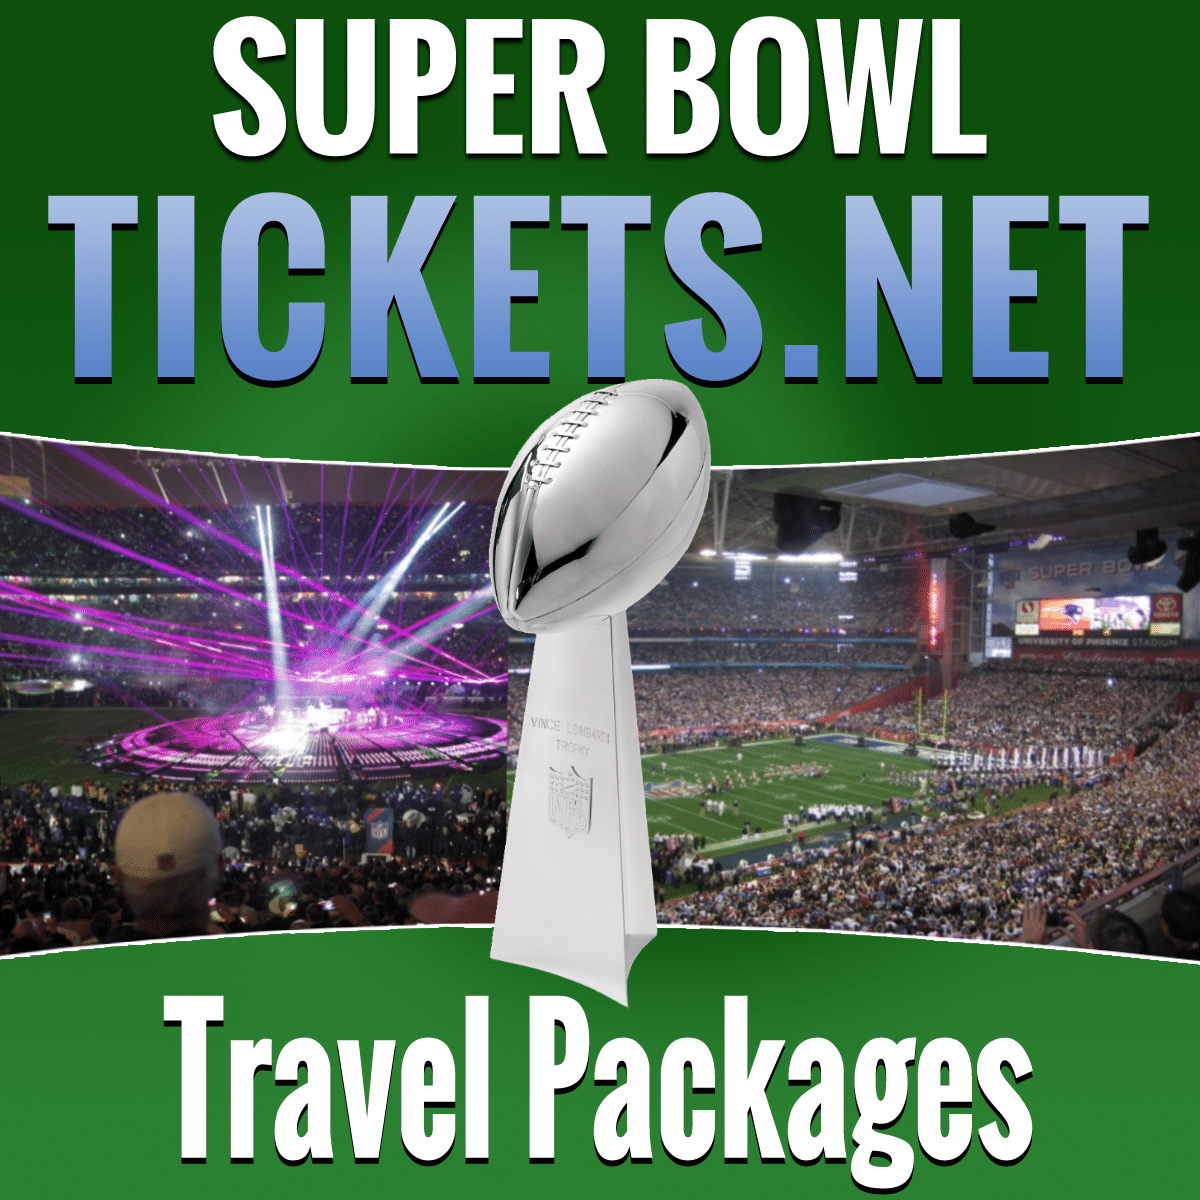 NFL Raises Super Bowl Ticket Prices for 2014 Game! | Superbowl Tickets & Packages1200 x 1200